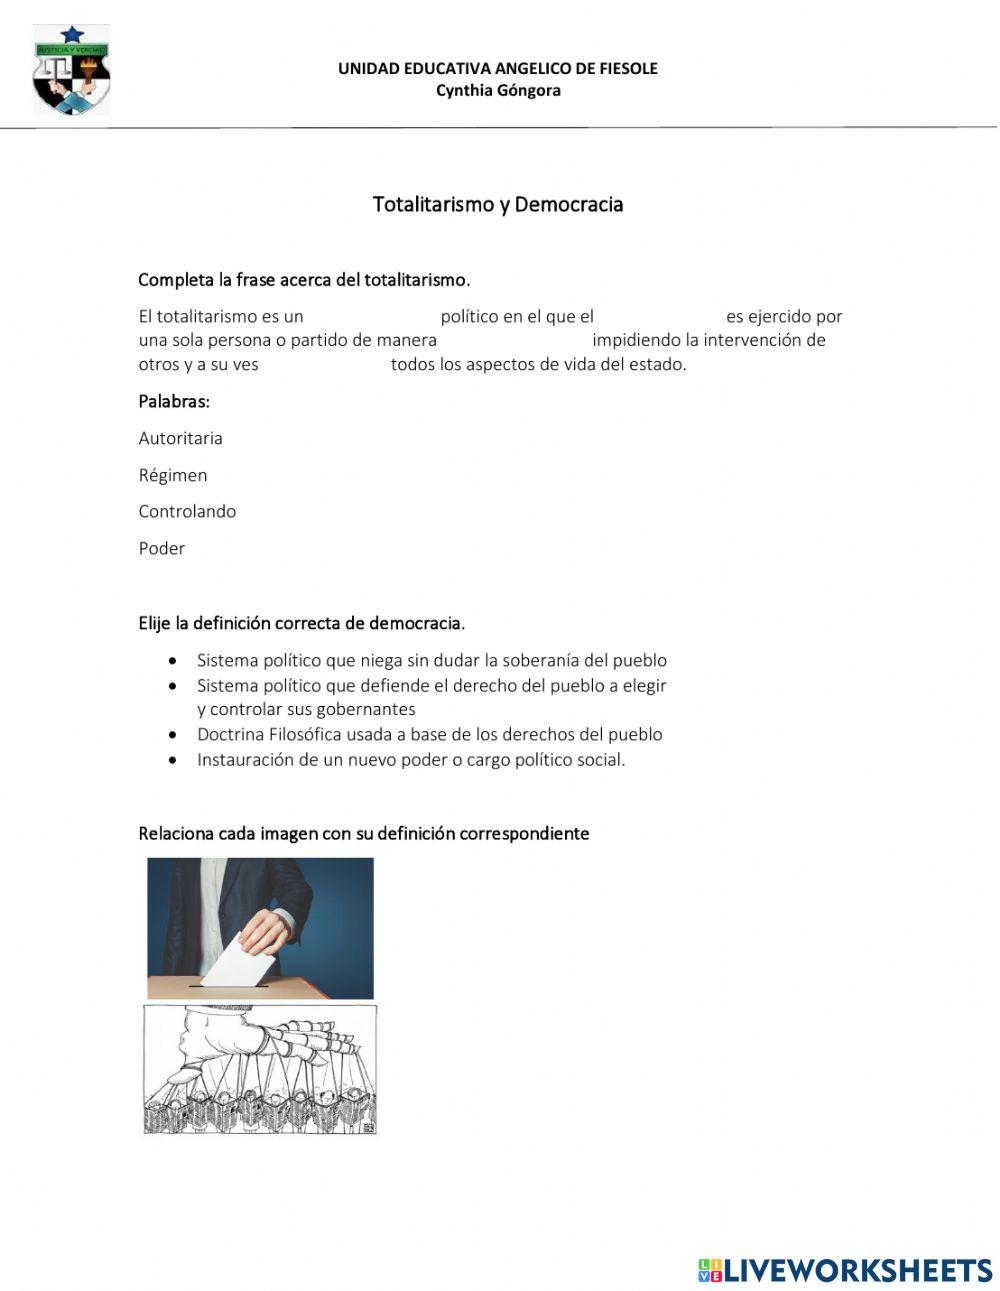 Totalitarismo online exercise for